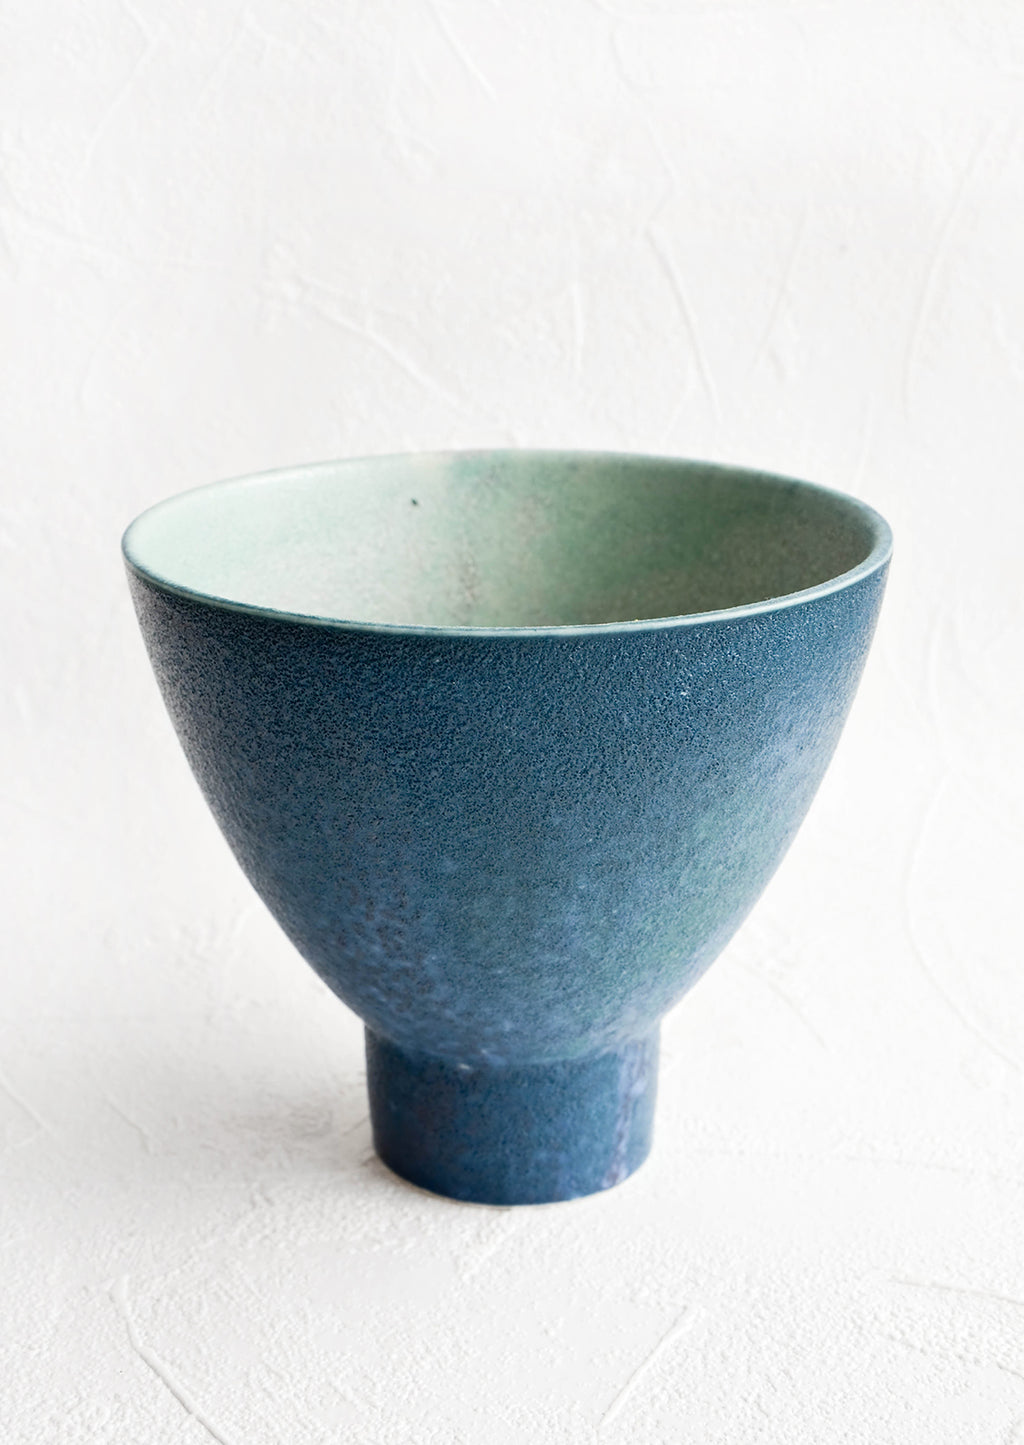 1: Round ceramic planter with tapered, footed silhouette. Textured deep blue glaze with turquoise interior.